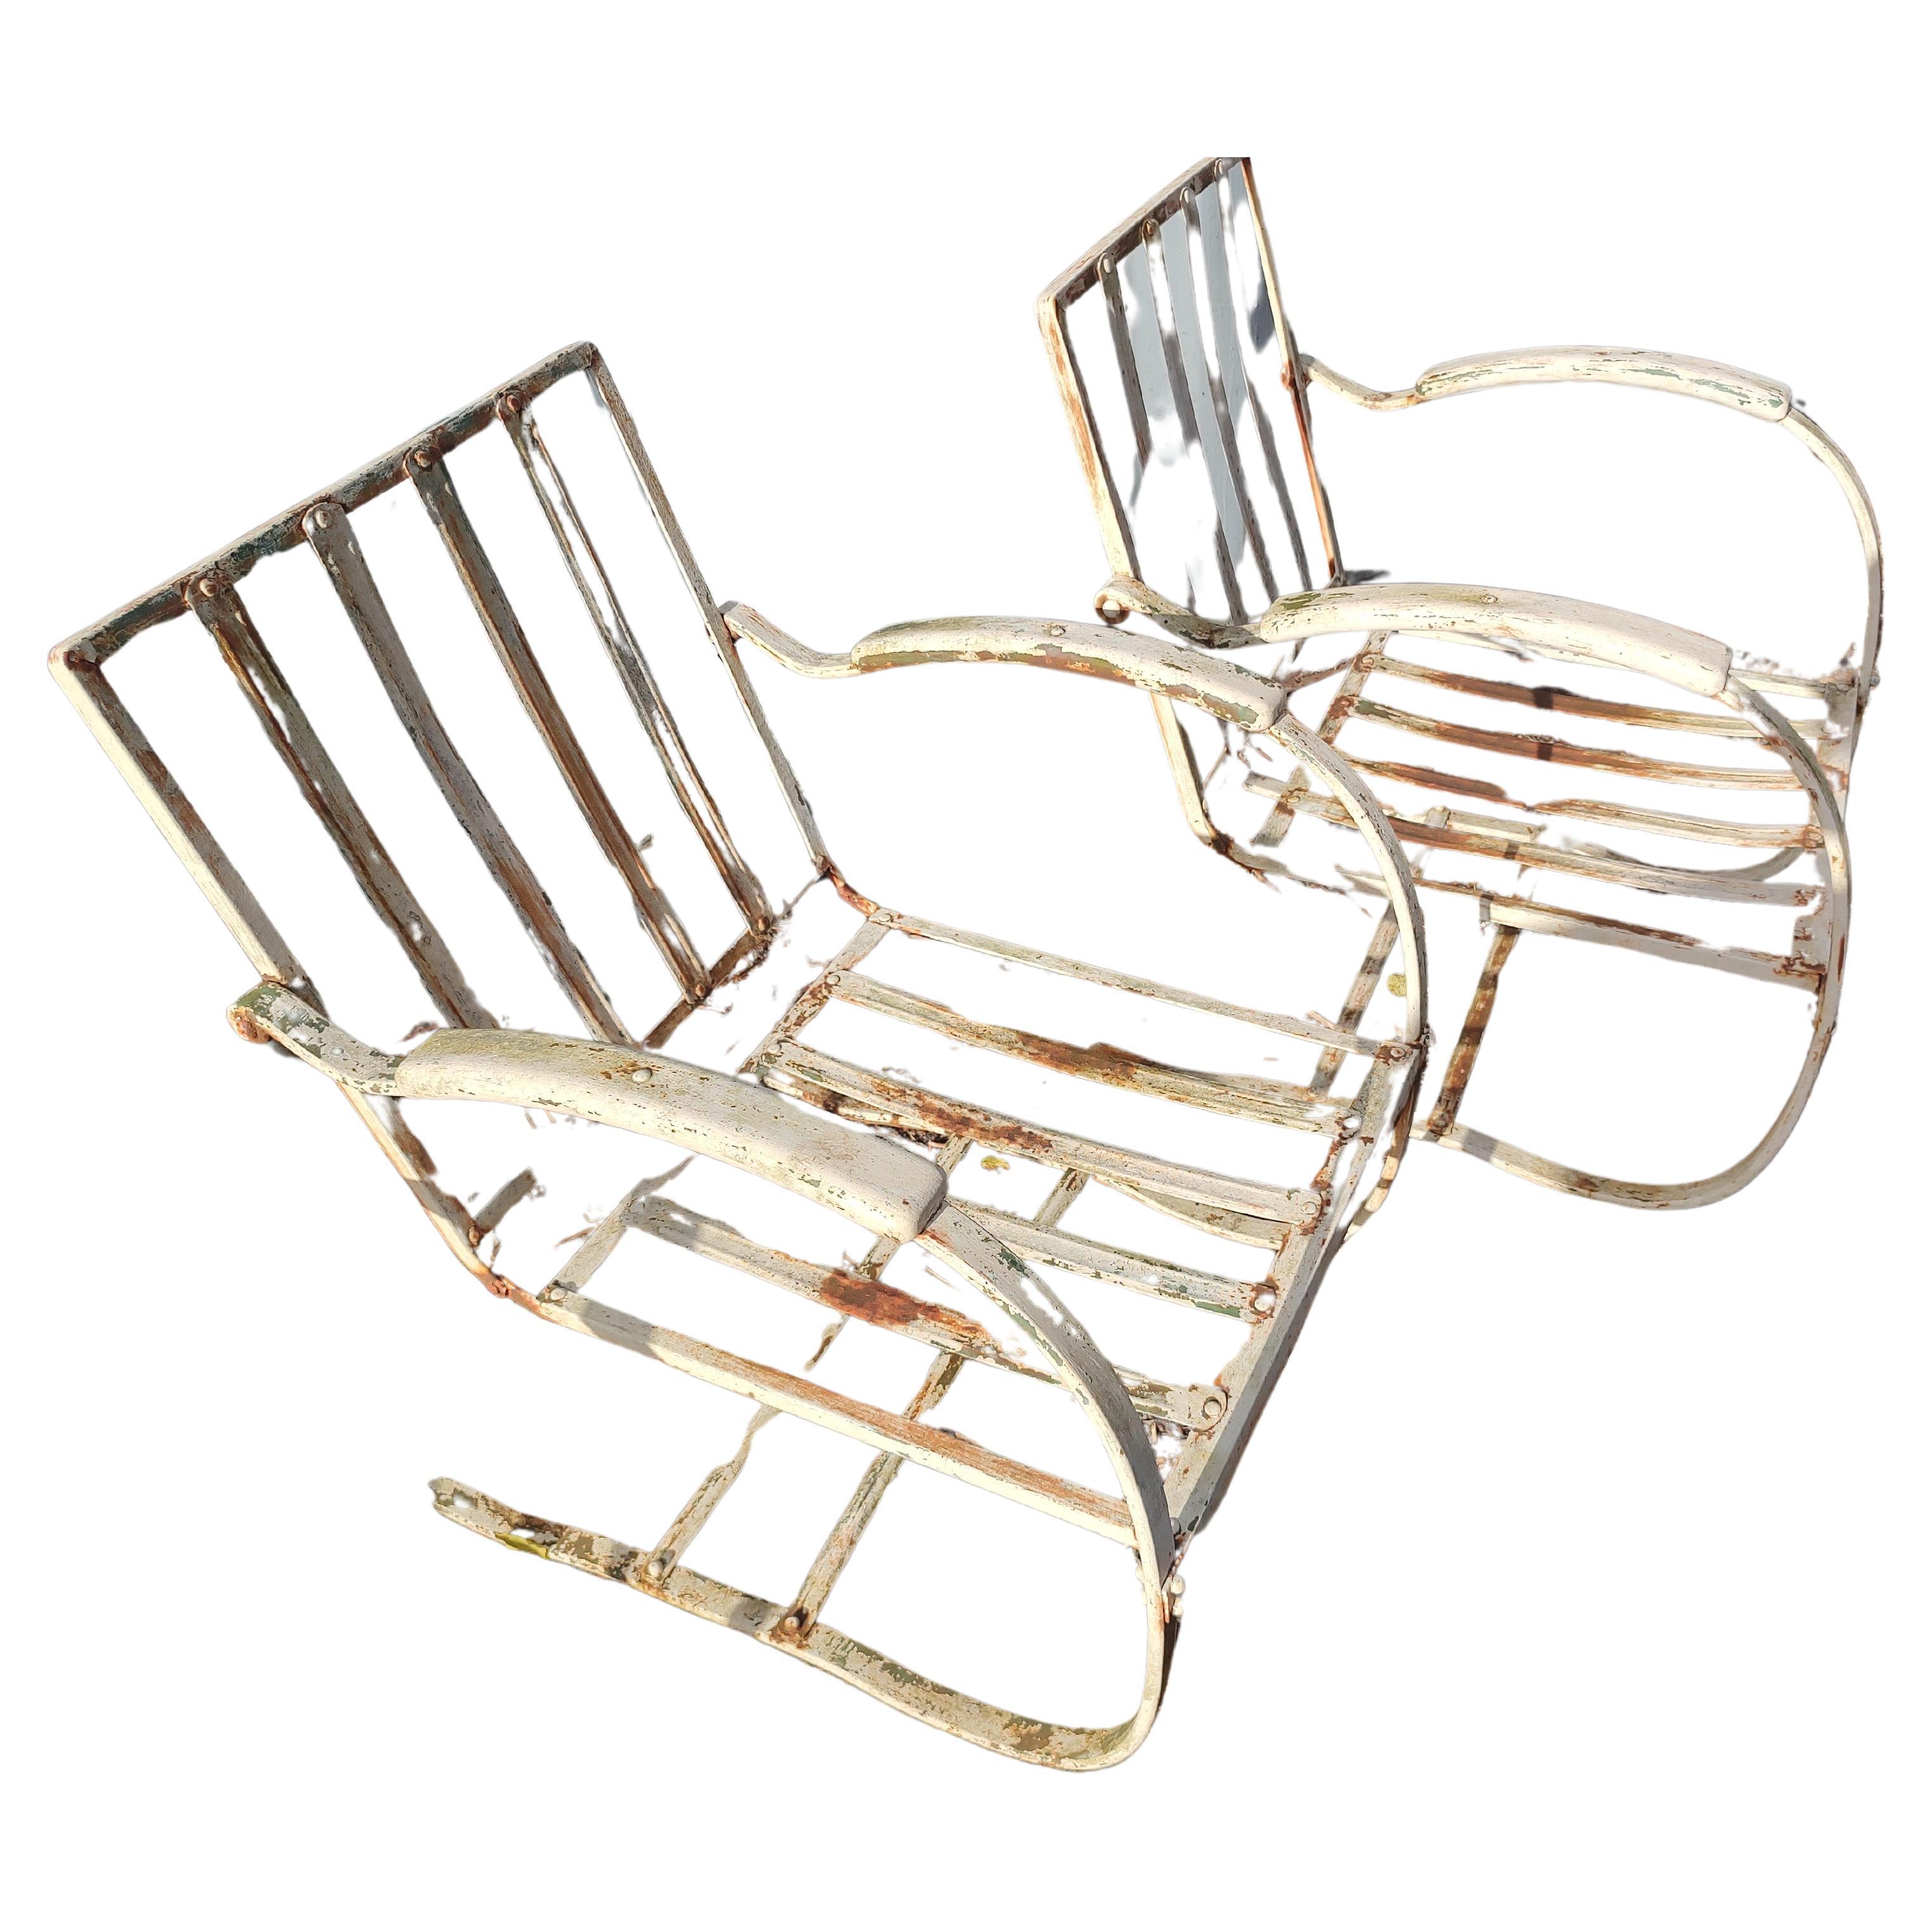 Two Pairs of Art Deco Cantilevered Spring Steel & Iron Lounge Chairs C1948 For Sale